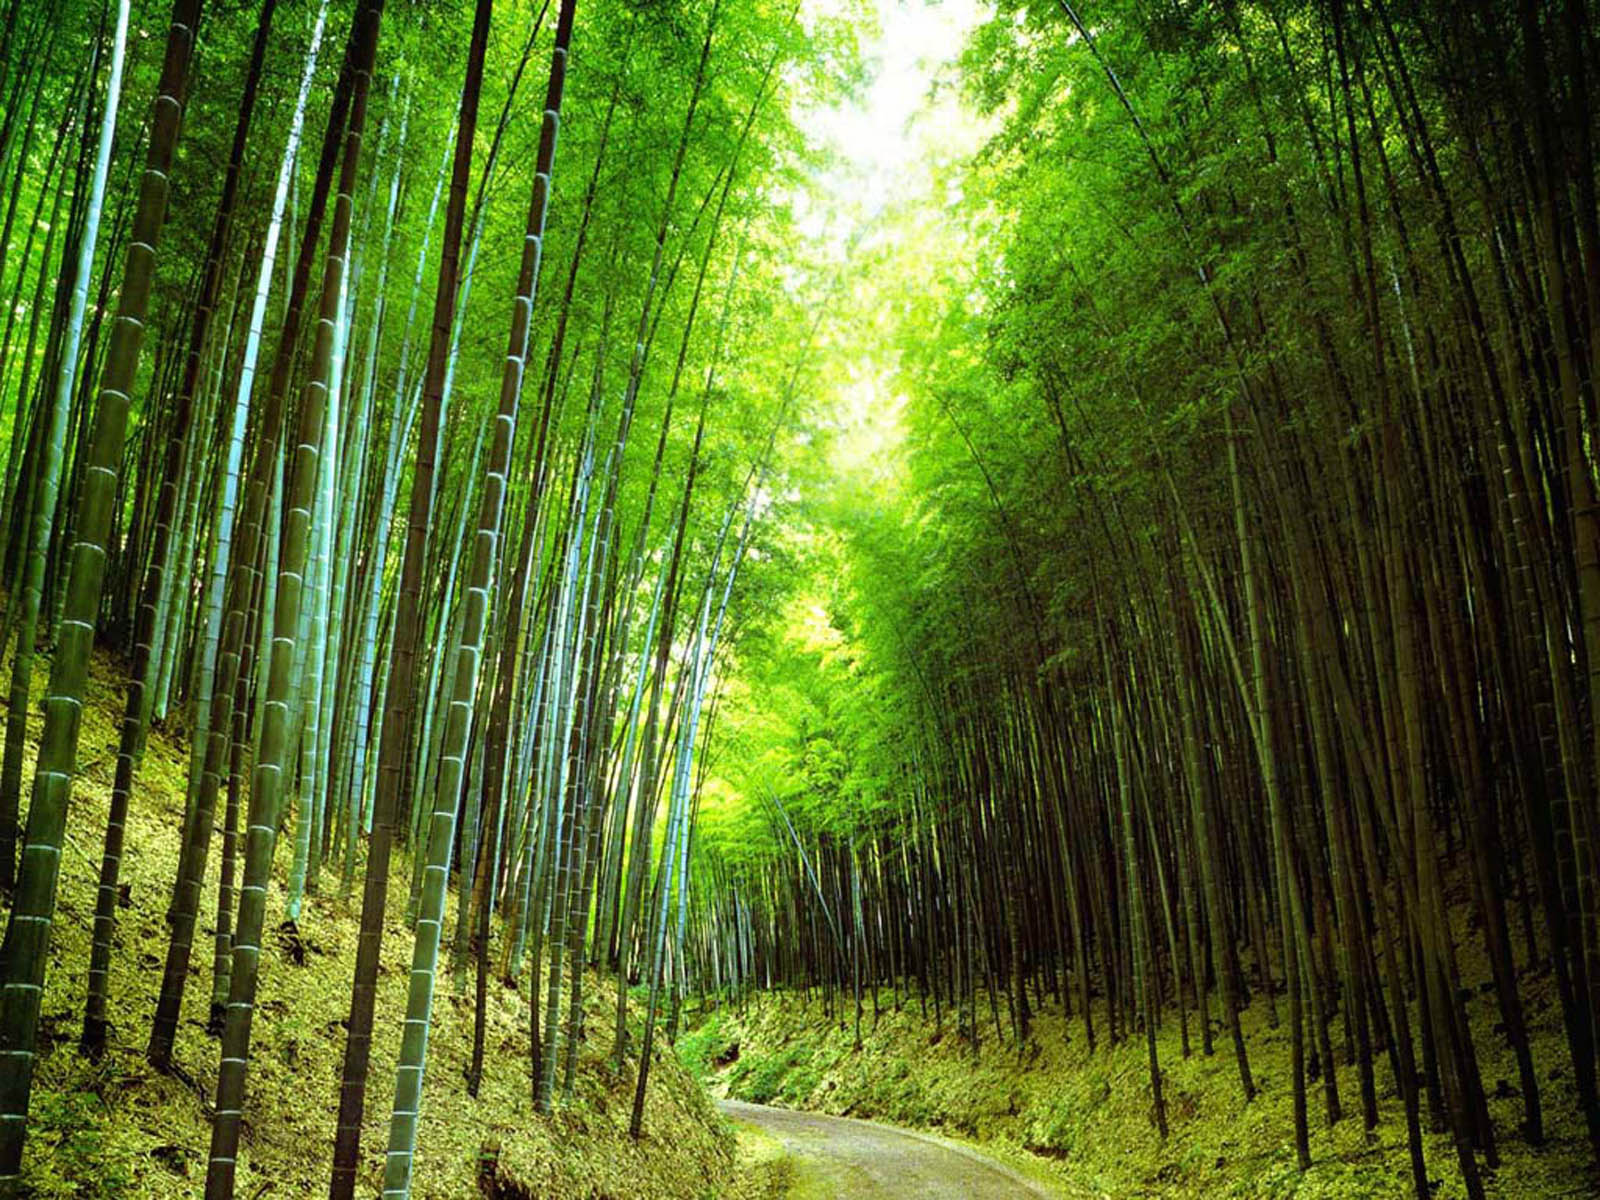 Bamboo Forest Wallpaper Image Photos Pictures And Background